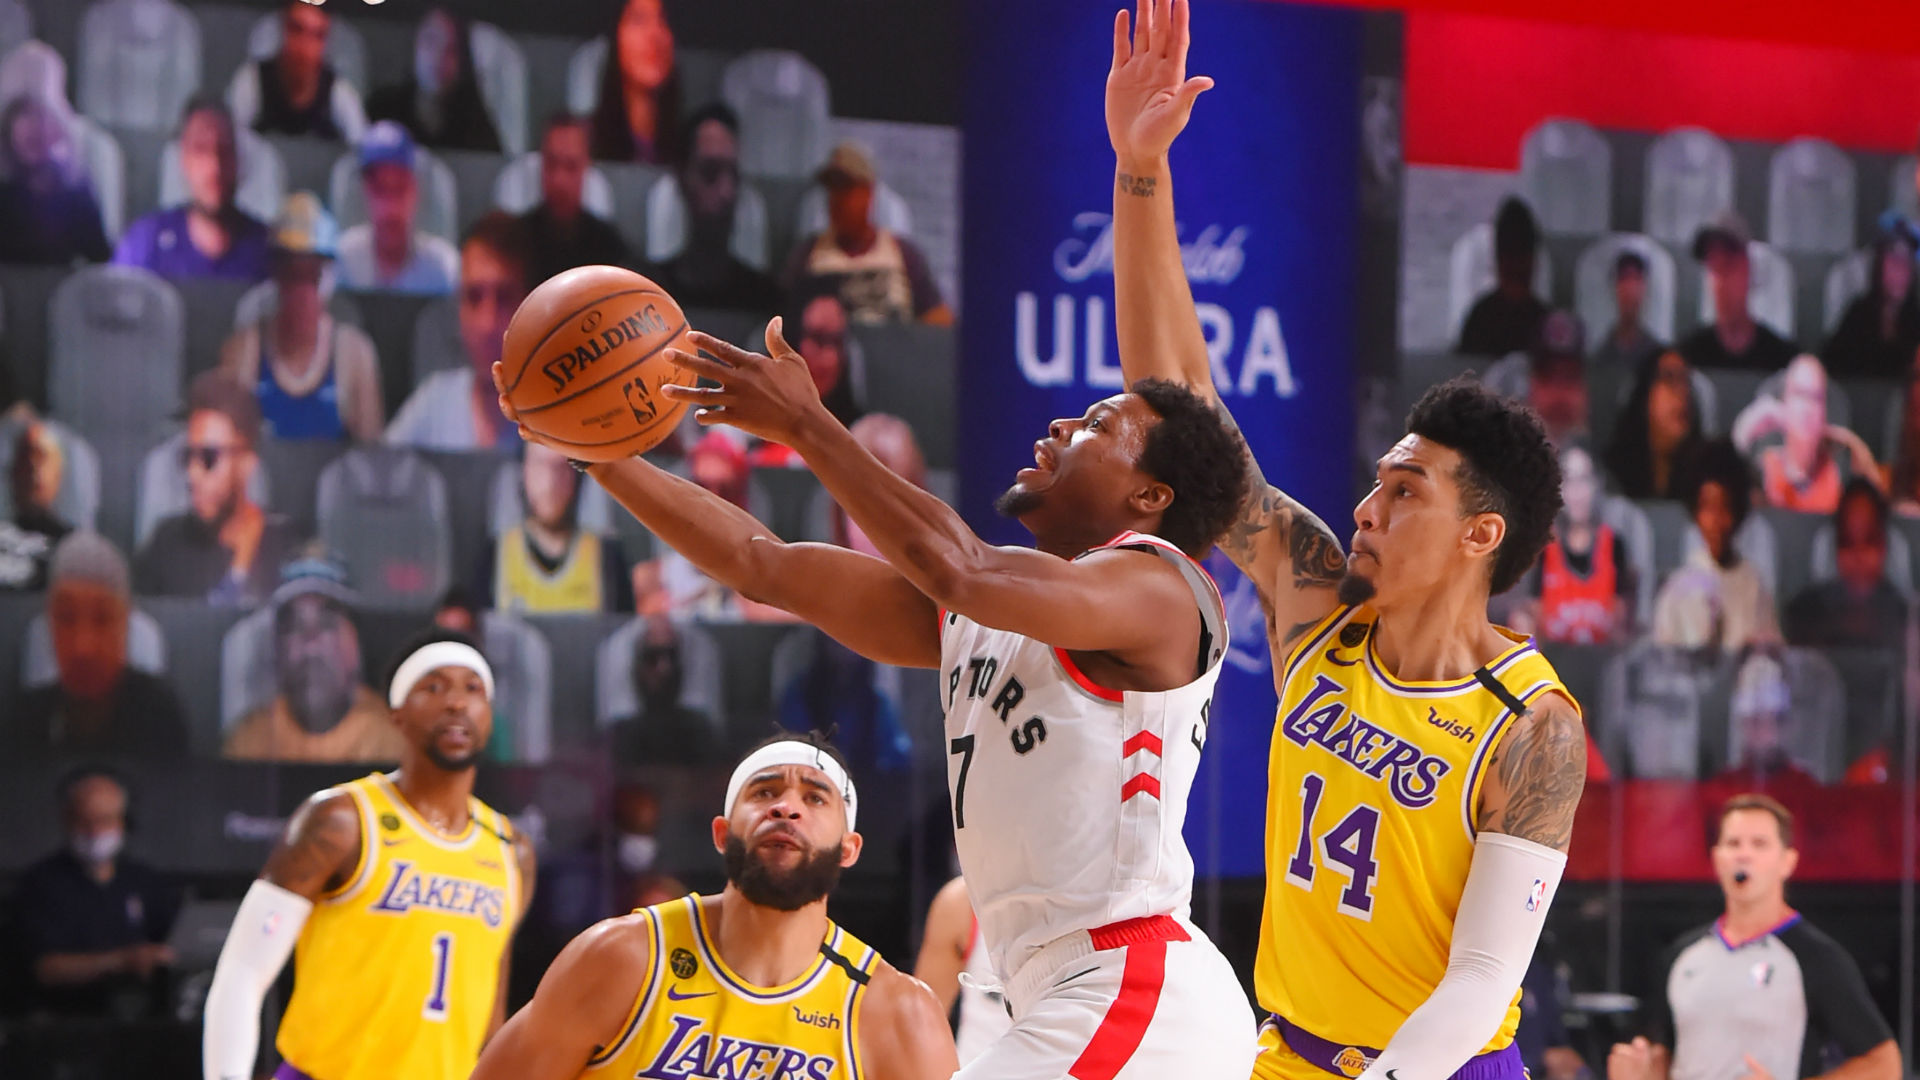 Los Angeles Lakers Eyeing Major Roster Boost with Potential Kyle Lowry Signing Amid NBA Trade Buzz